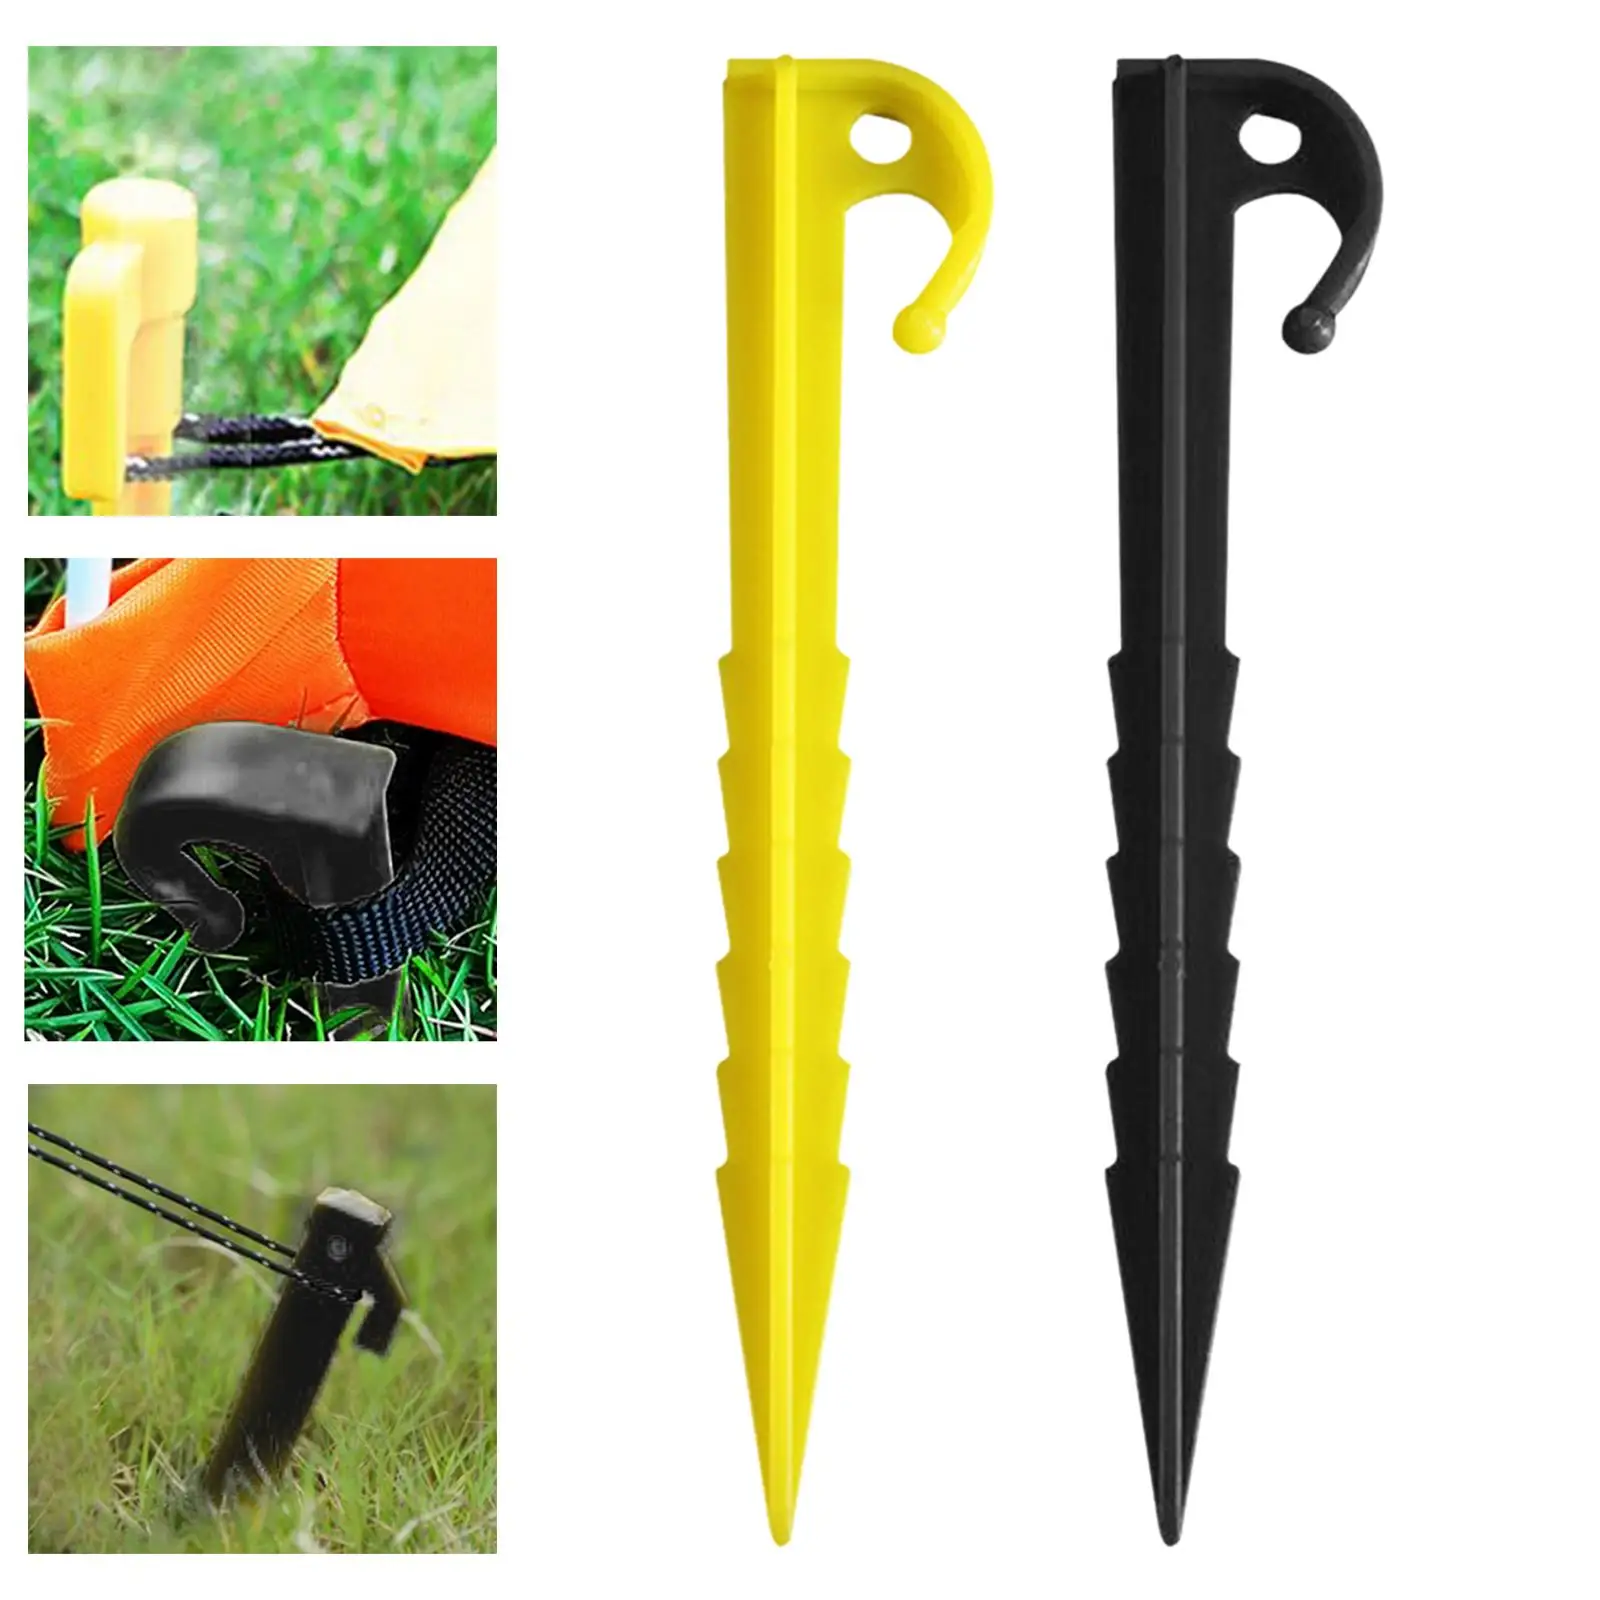 10 Pieces Lightweight Tent Stakes Tent Nails Pegs Sand Rust-Proof Ground Anchoring Pegs for Camping Canopy Accessories